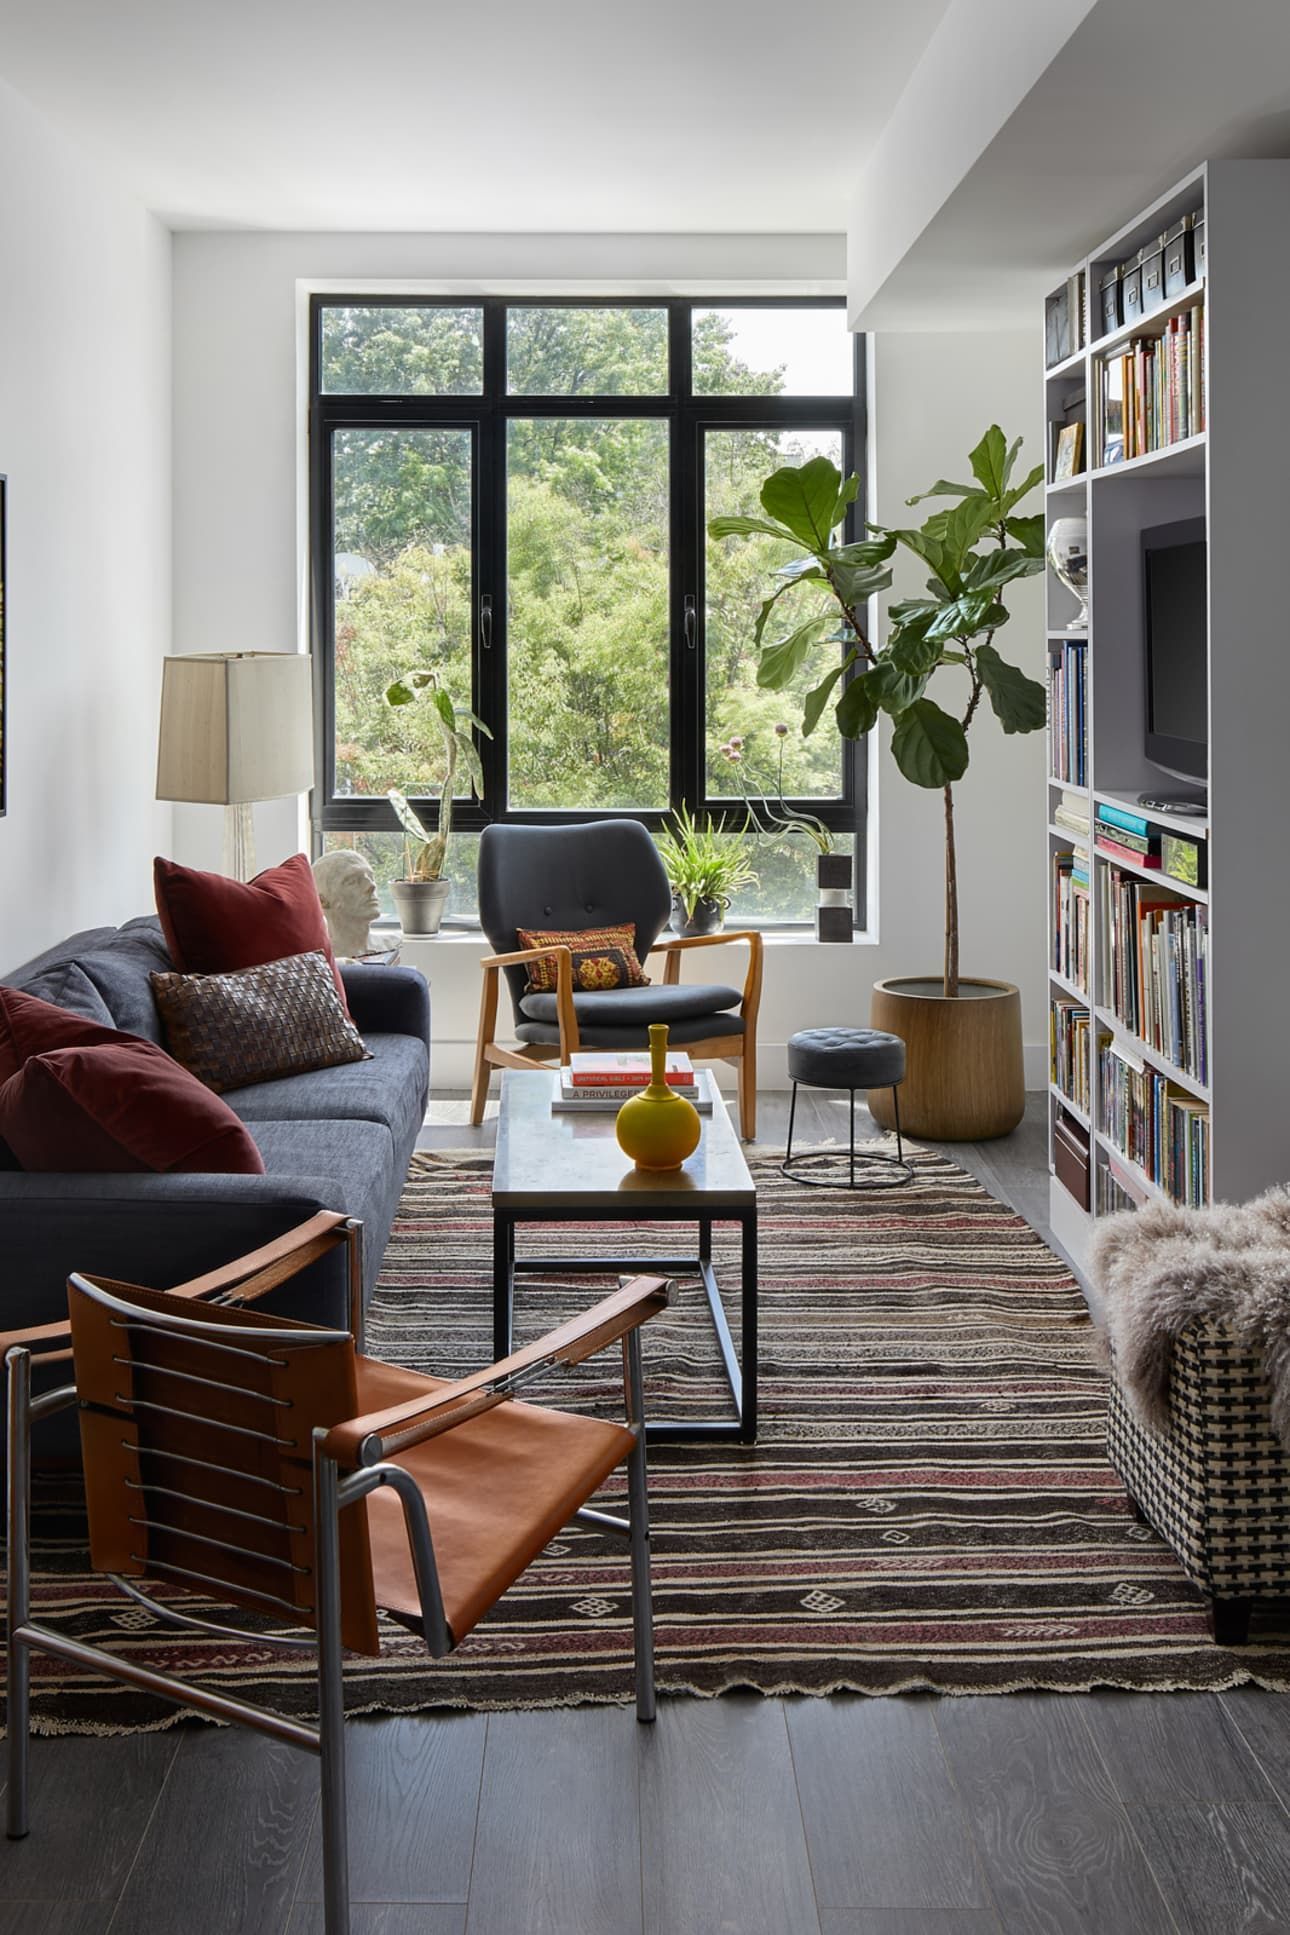 This Brooklyn Home Flawlessly Masters an Incredibly Long and Very Narrow Living Room -   15 room decor Simple apartment therapy ideas